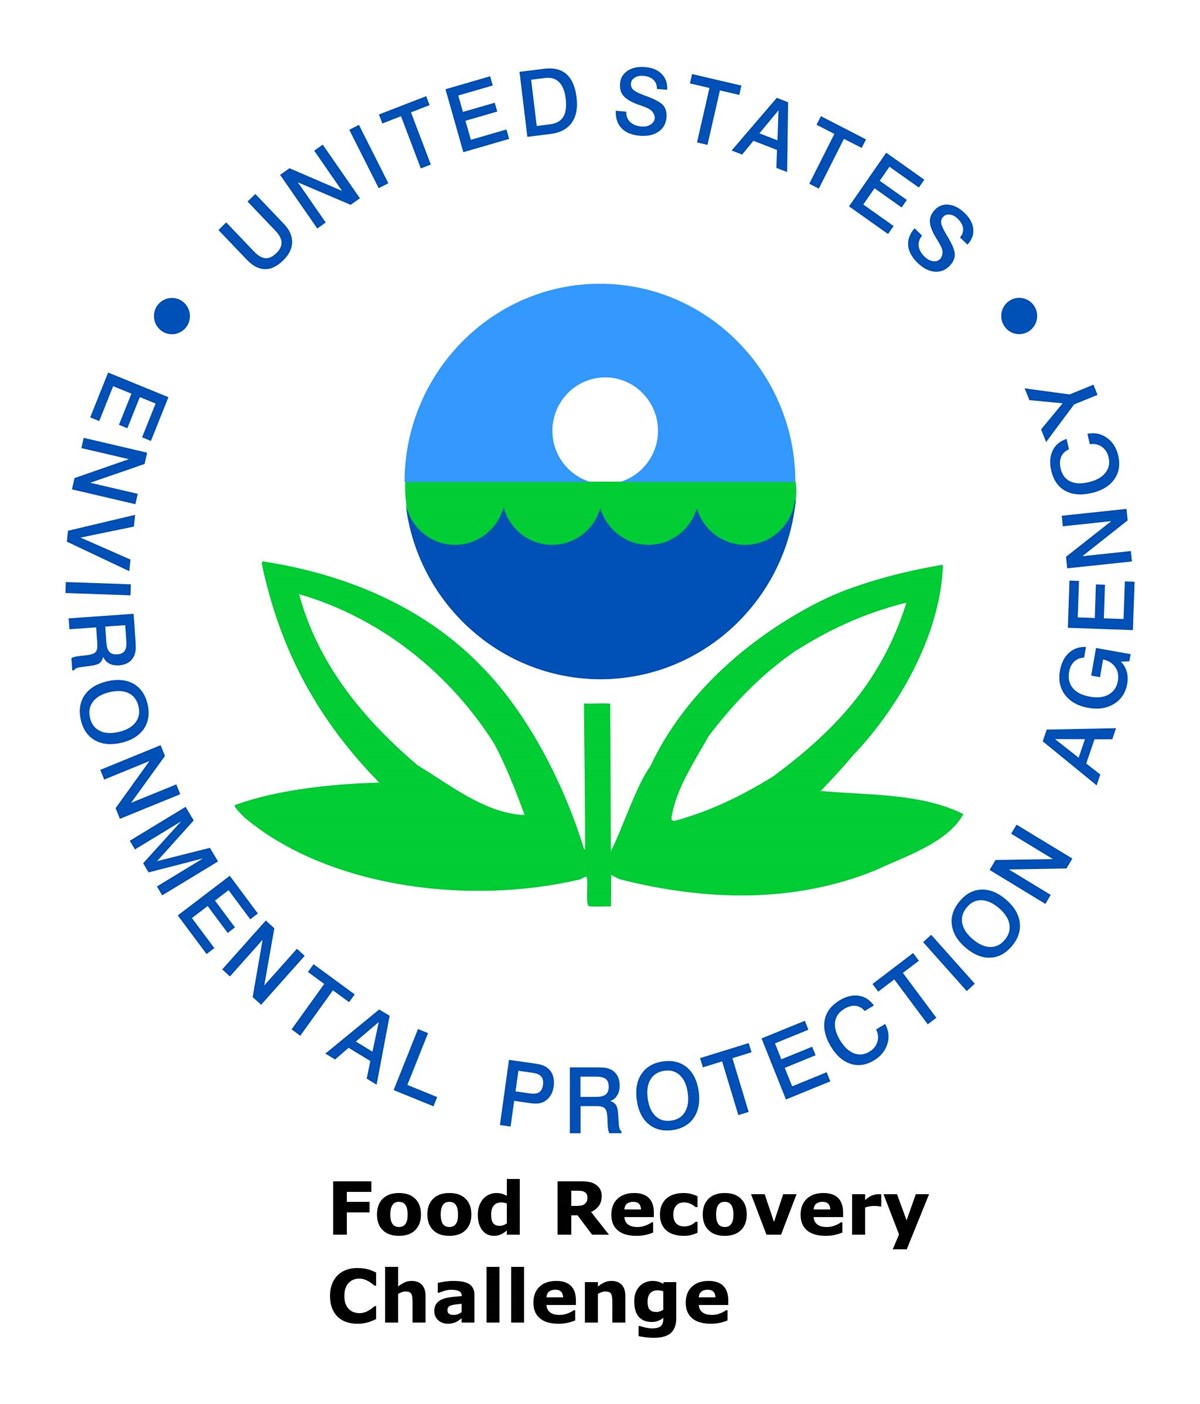 Environmental Protection Agency (EPA) Food Recovery Challenge logo